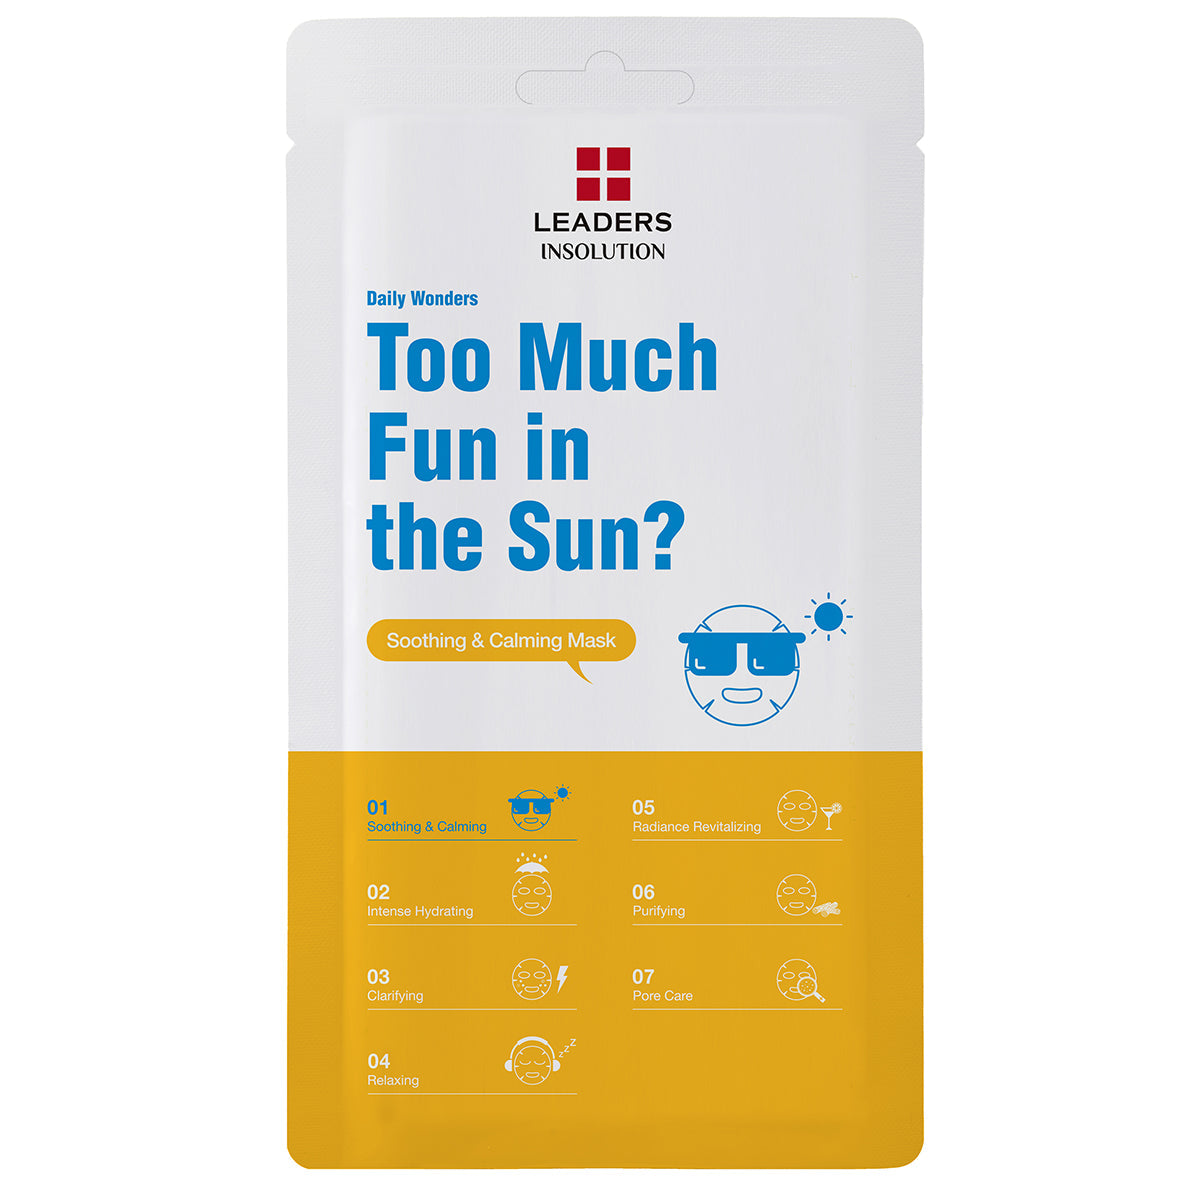 Daily Wonders Too Much Fun In the Sun? Soothing & Calming Mask | Leaders